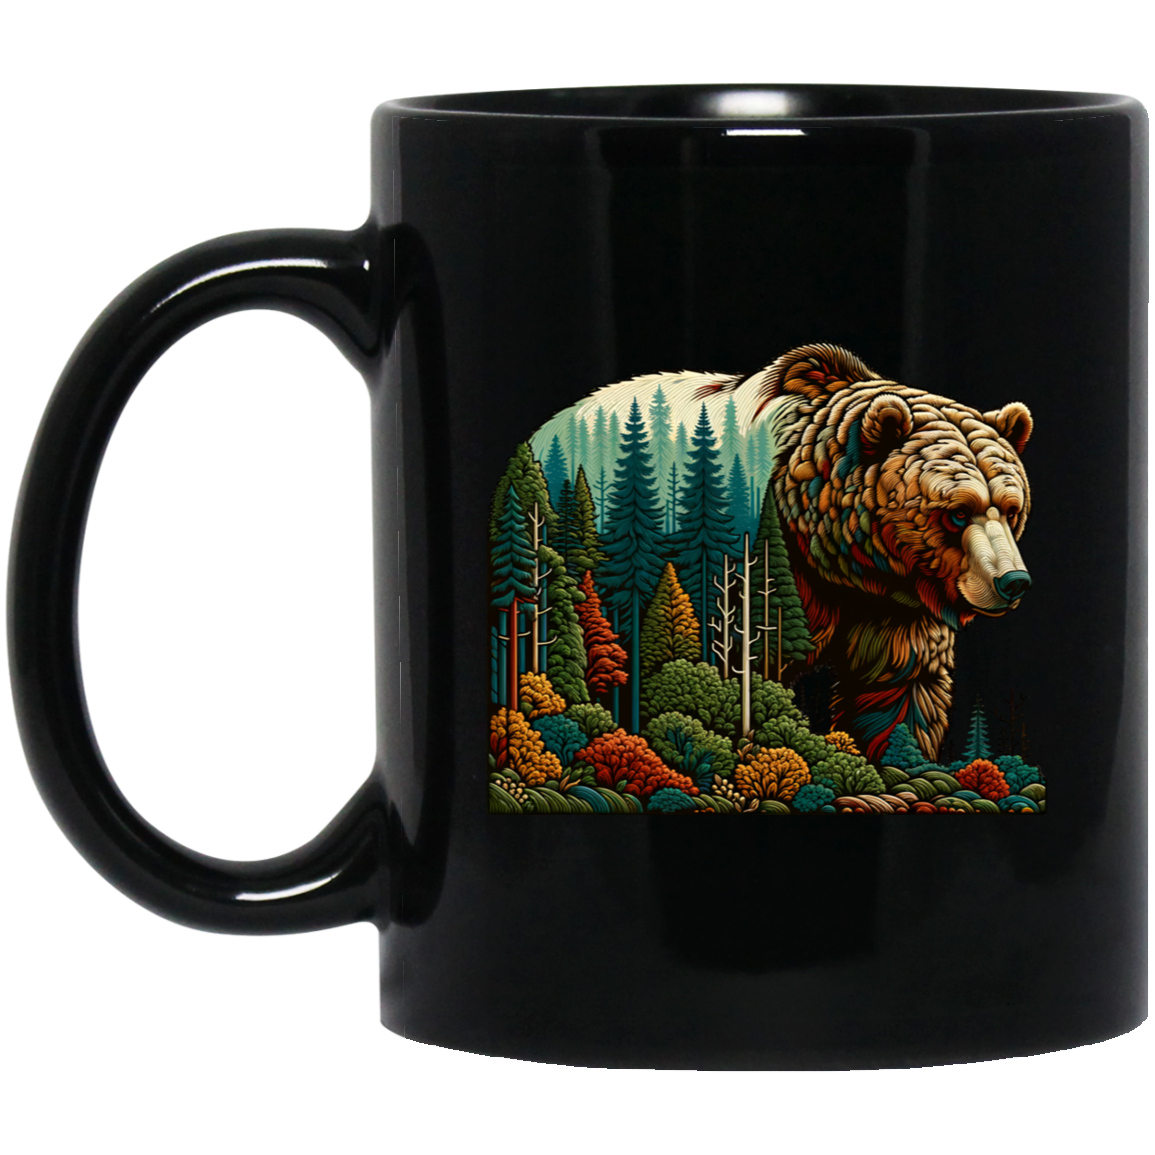 Guardian Grizzly - Mugs